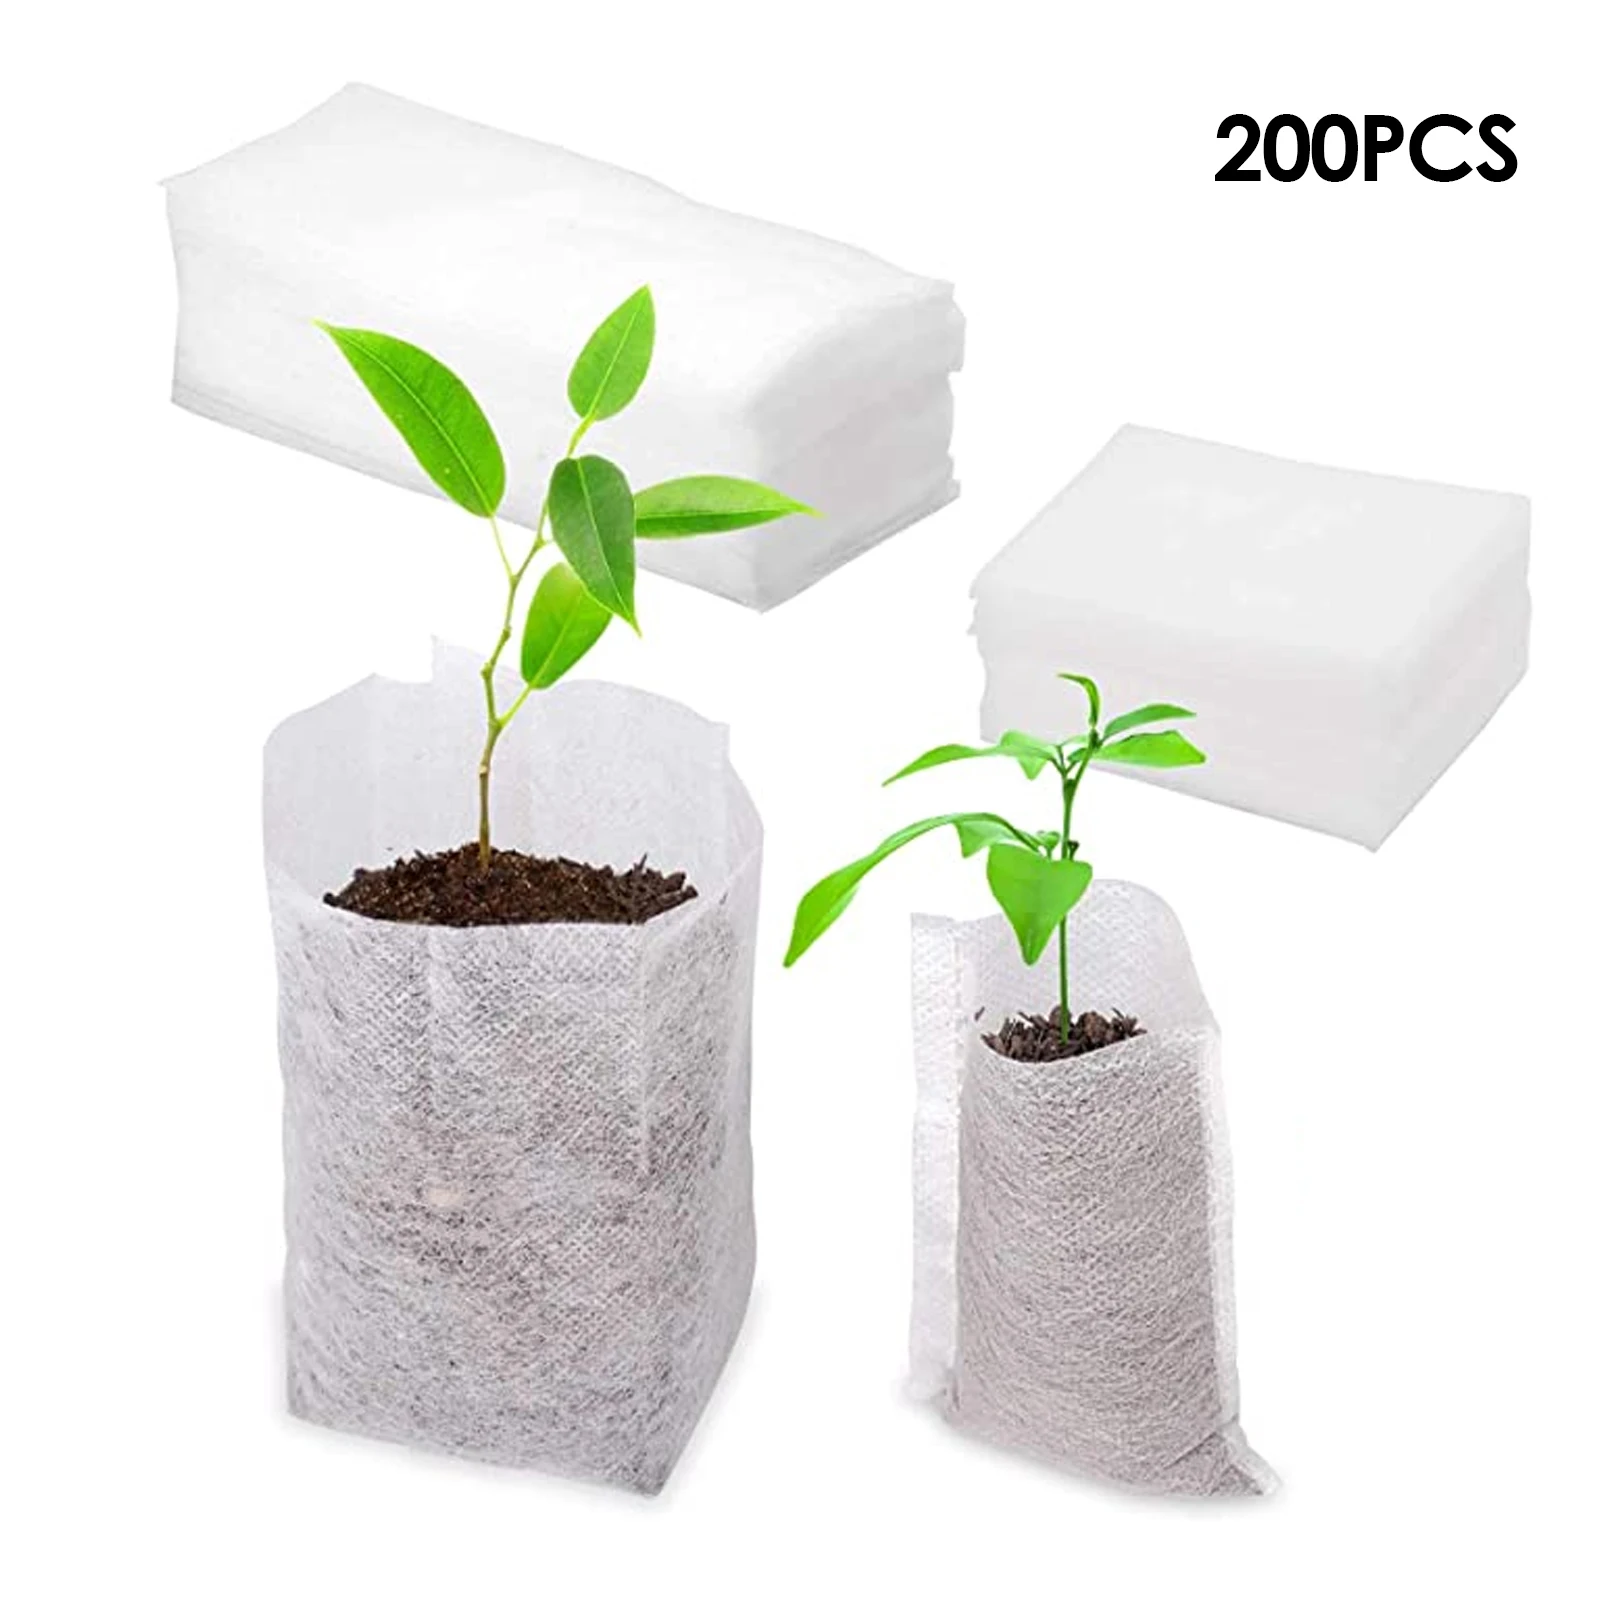 

200Pcs Plant Seedling Bags Biodegradable Nursery Bags Non-Woven Fabric Planting Breeding Plants Bag Planter For Seeds Garden